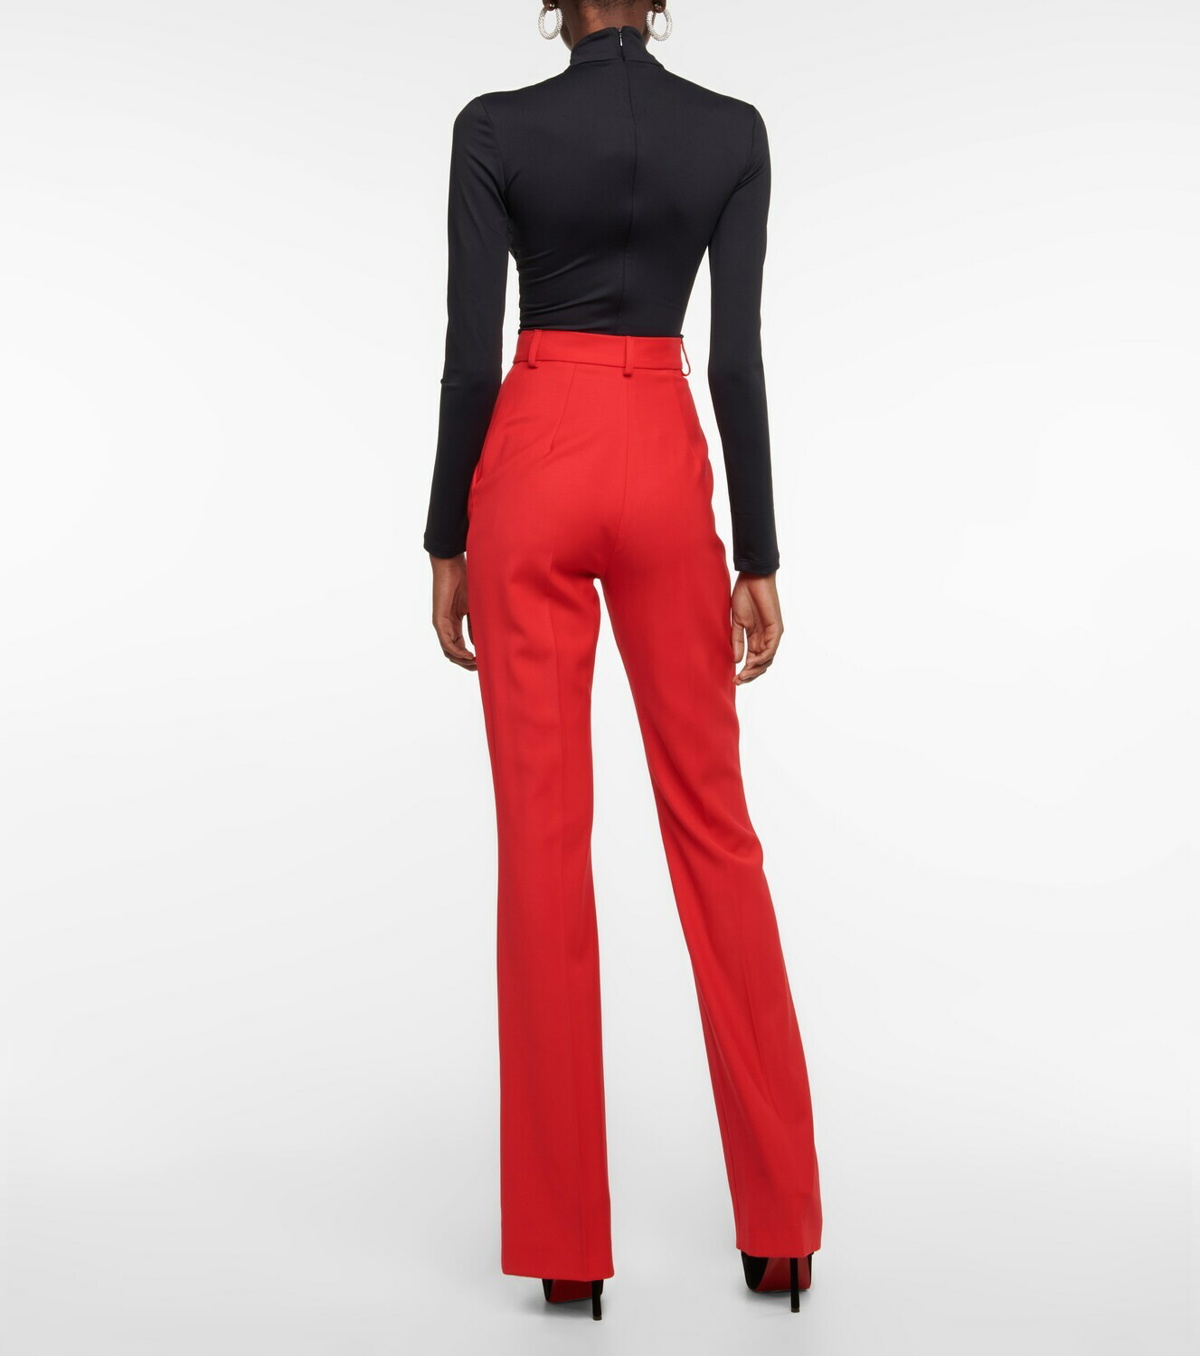 Lace-up cotton jersey flared pants in black - David Koma